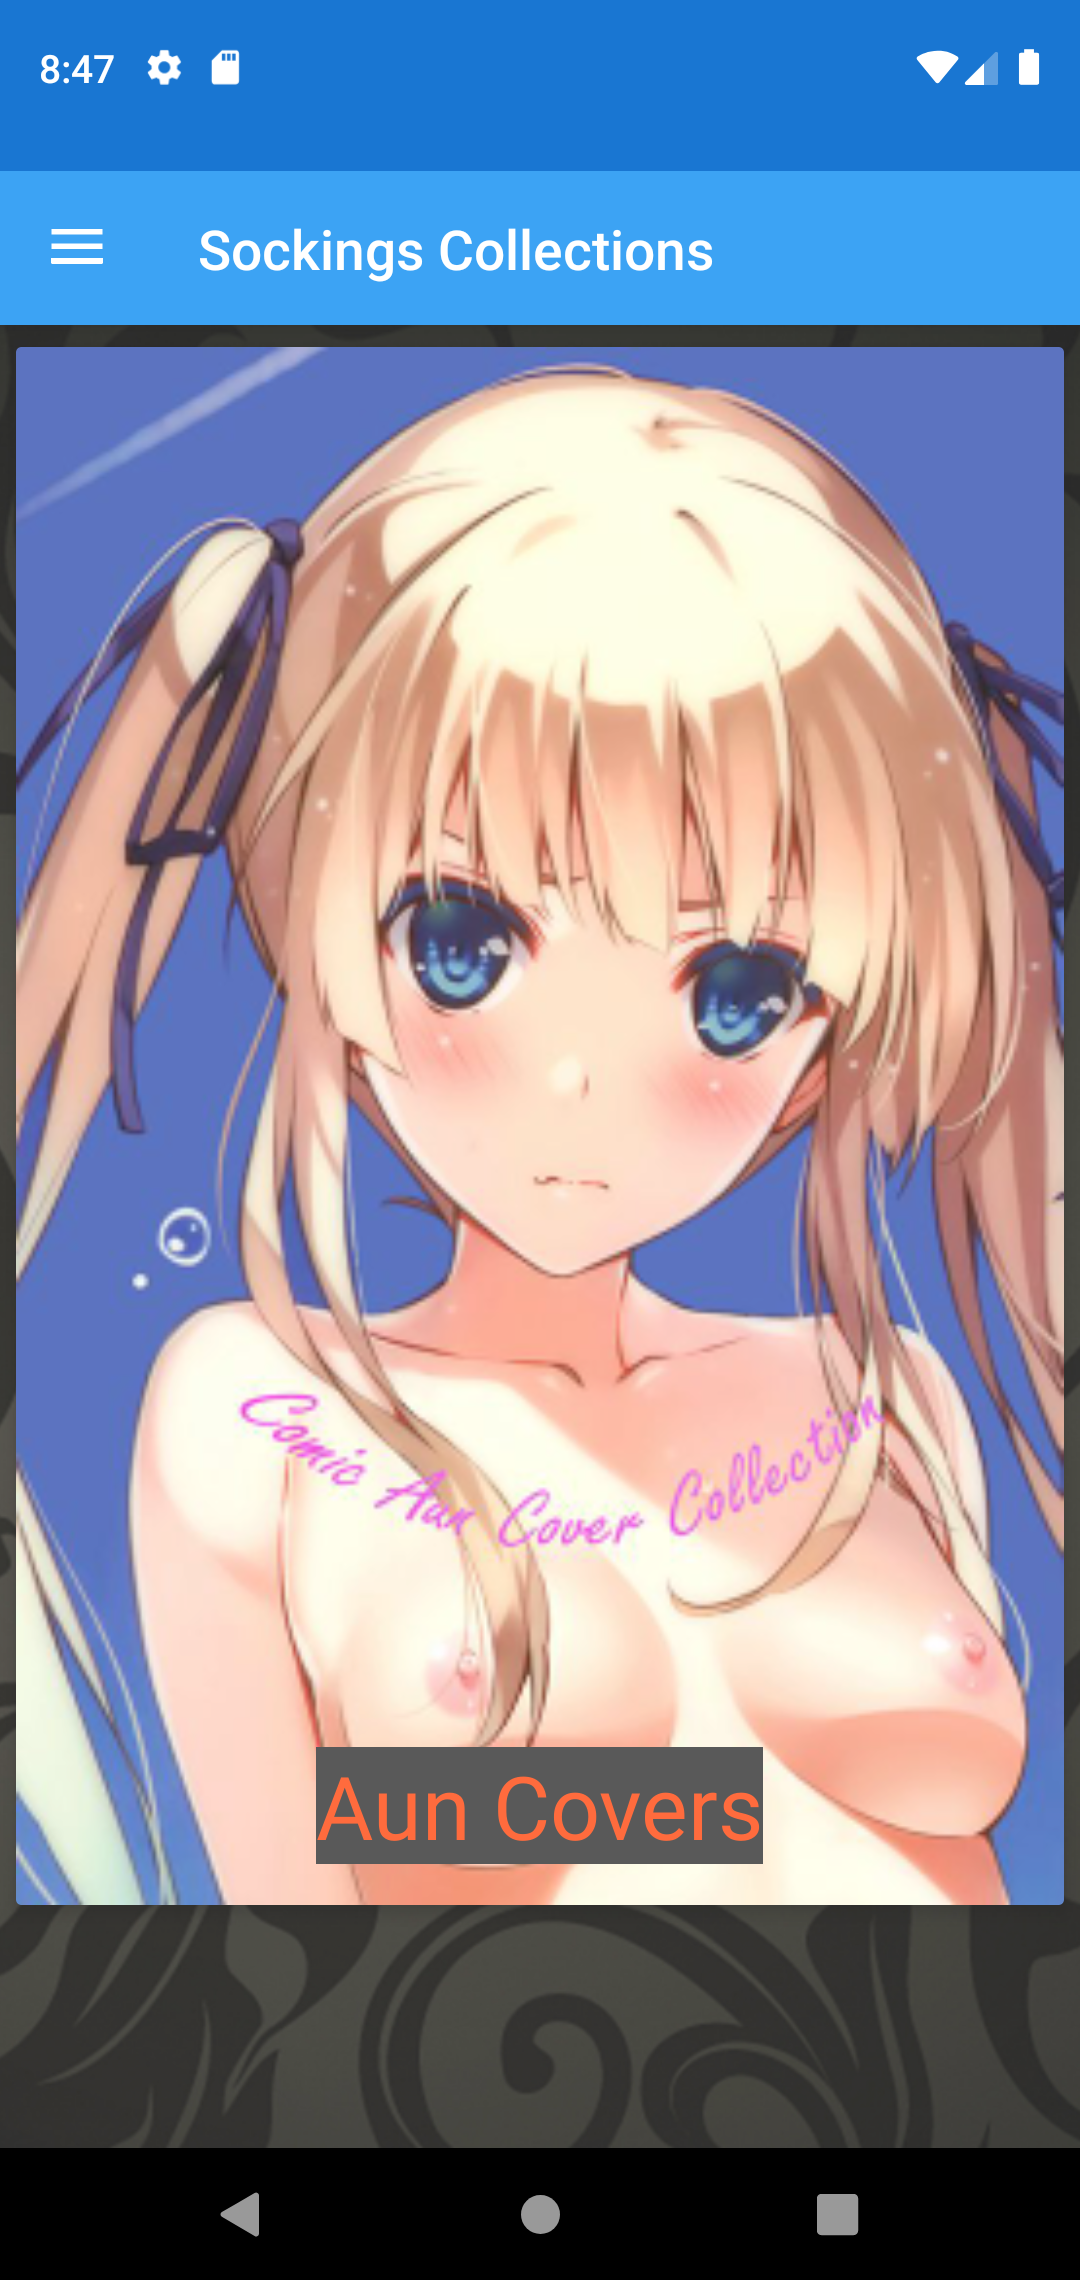 Sockings Collections manga,stockings,best,android,hot,galleries,downloader,cosplay,anime,pictures,sexy,porn,beta,star,adult,pics,apk,app,henatai,apps,hentai,comics,gallery